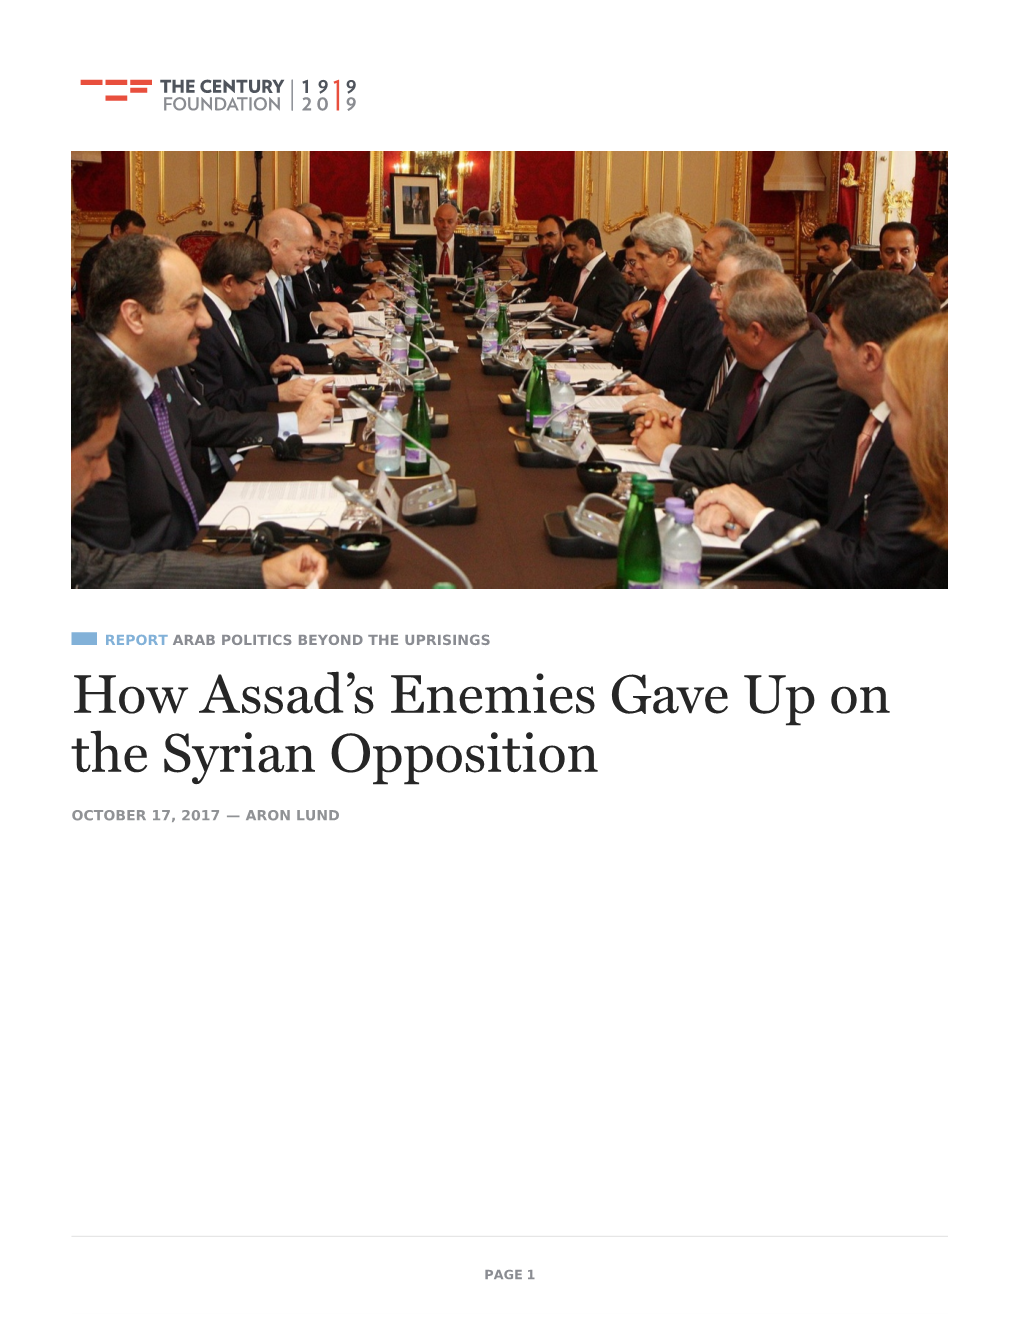 How Assad's Enemies Gave up on the Syrian Opposition